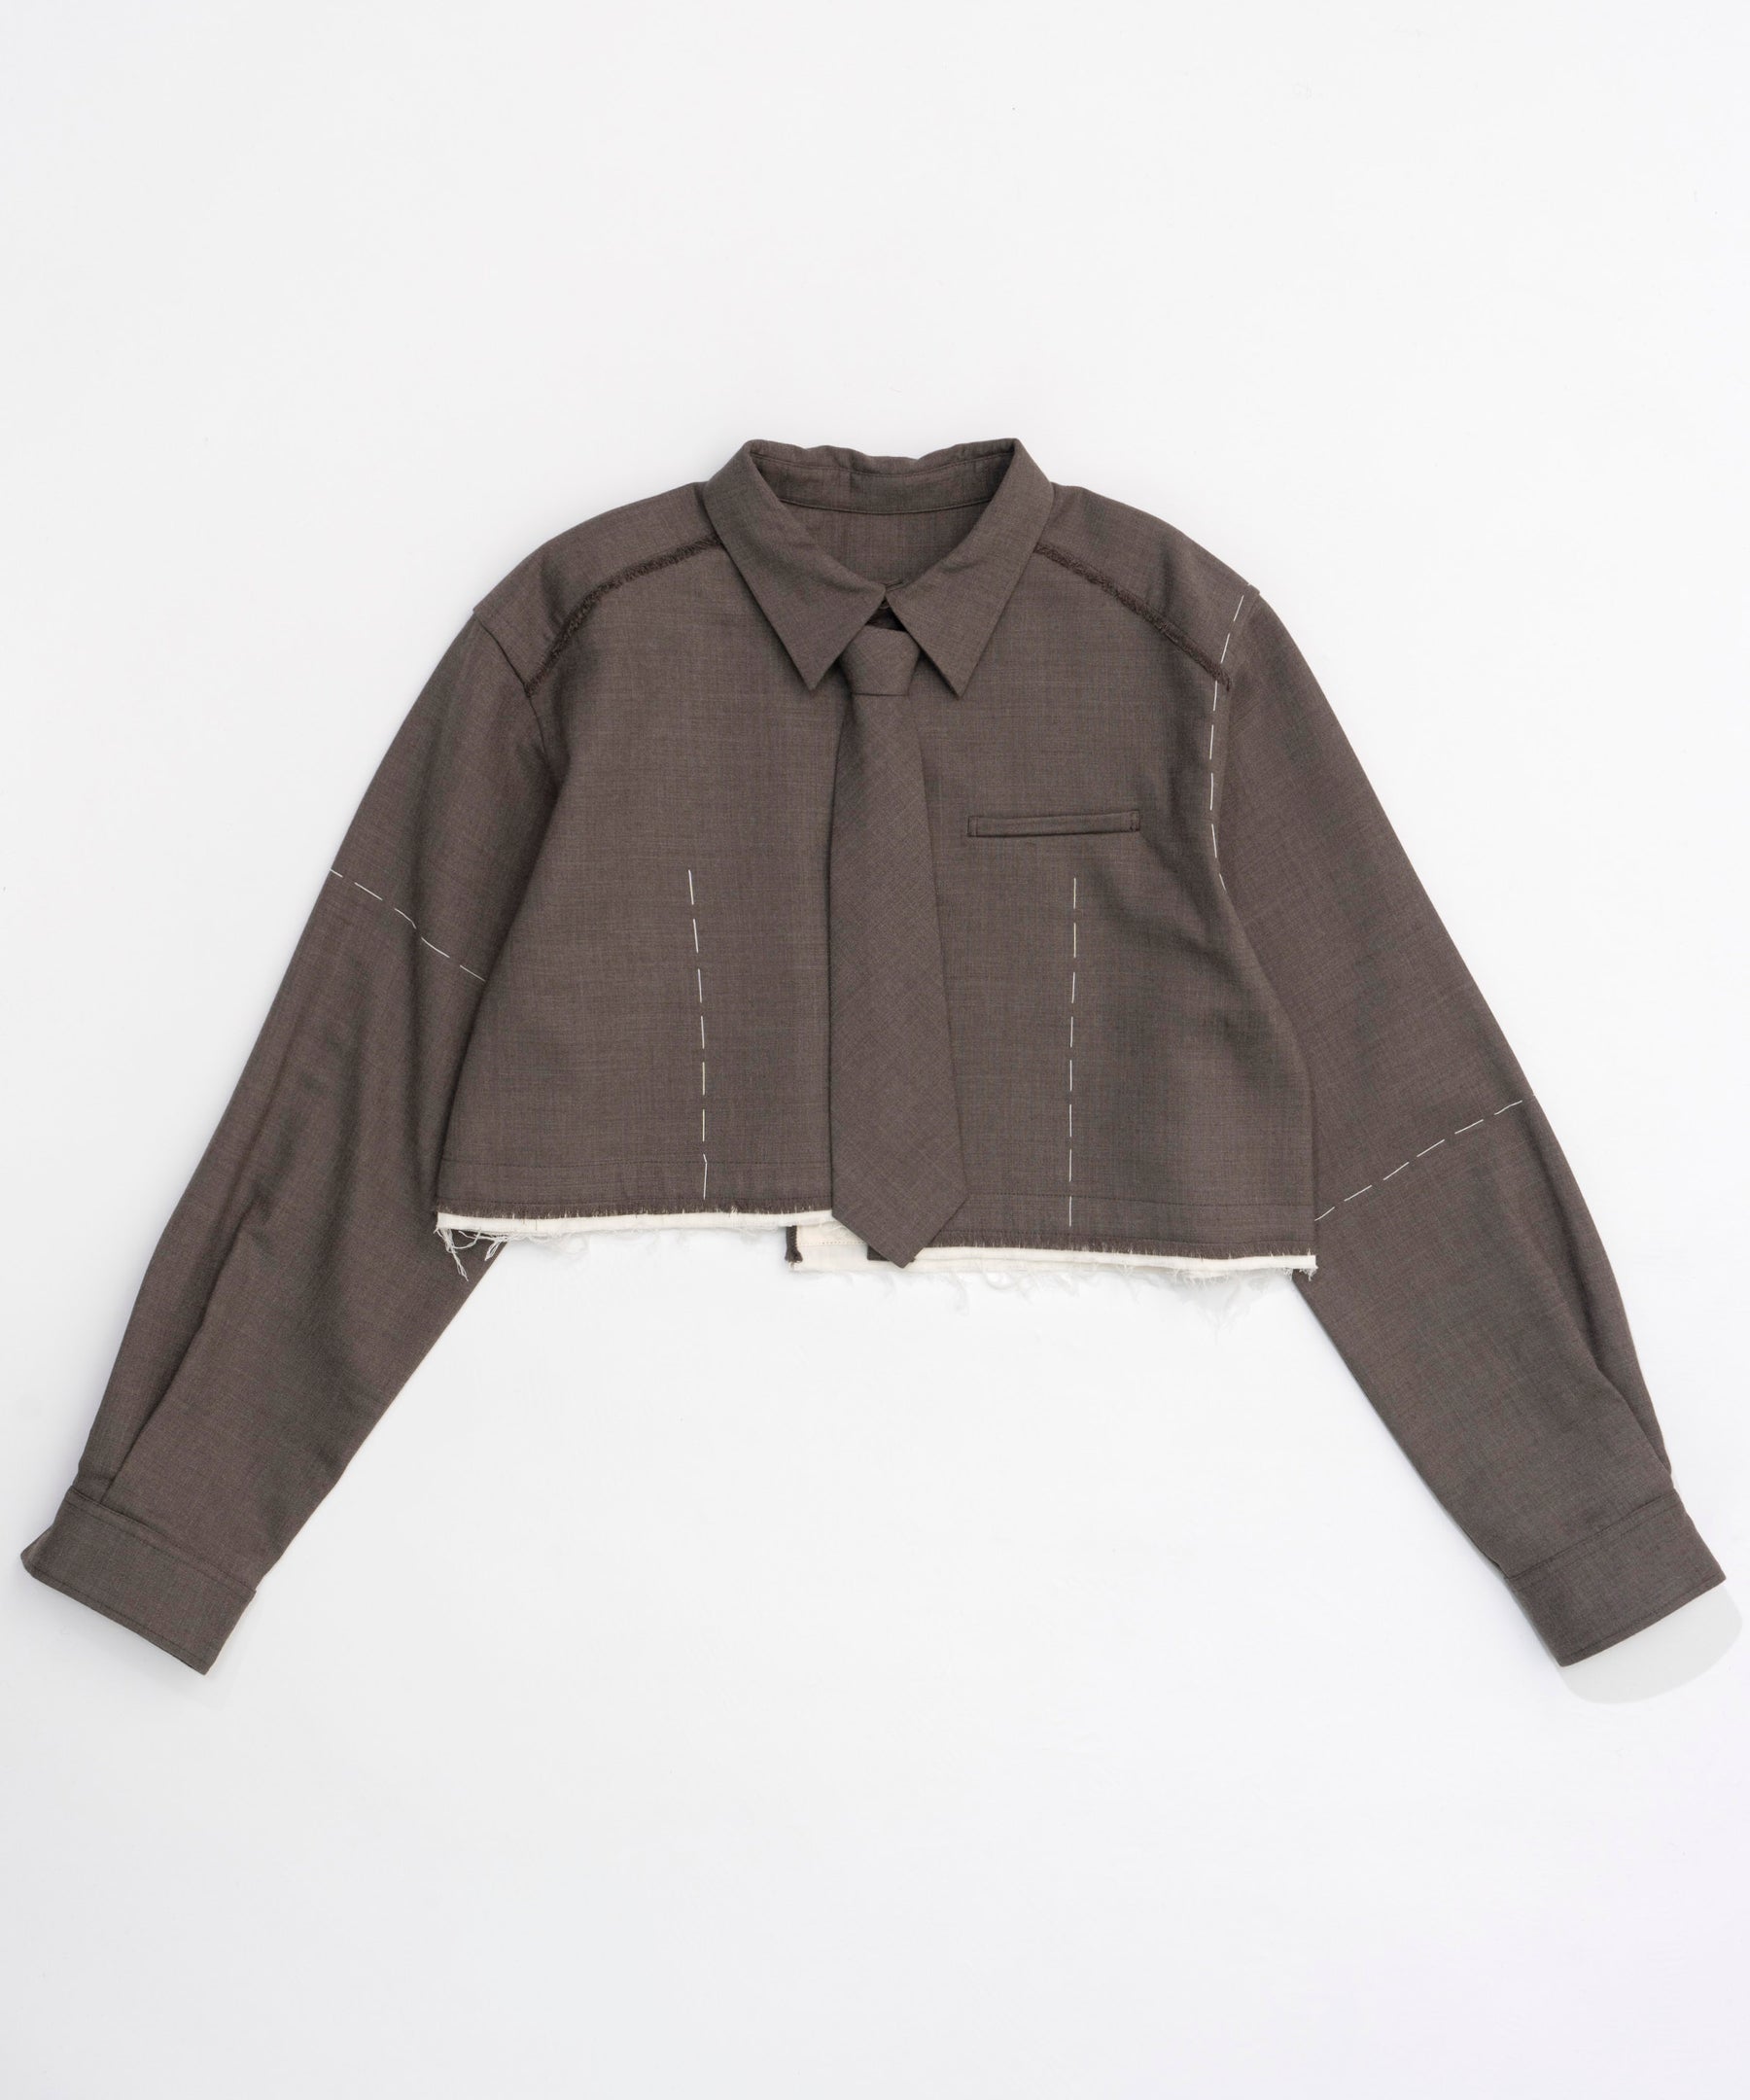 【24AUTUMN PRE-ORDER】Hand Stitch with Tie Short length SHIRT トップス 新品 Maison SPECIAL BRN レディース Free 4% 100% Name 25% 36%